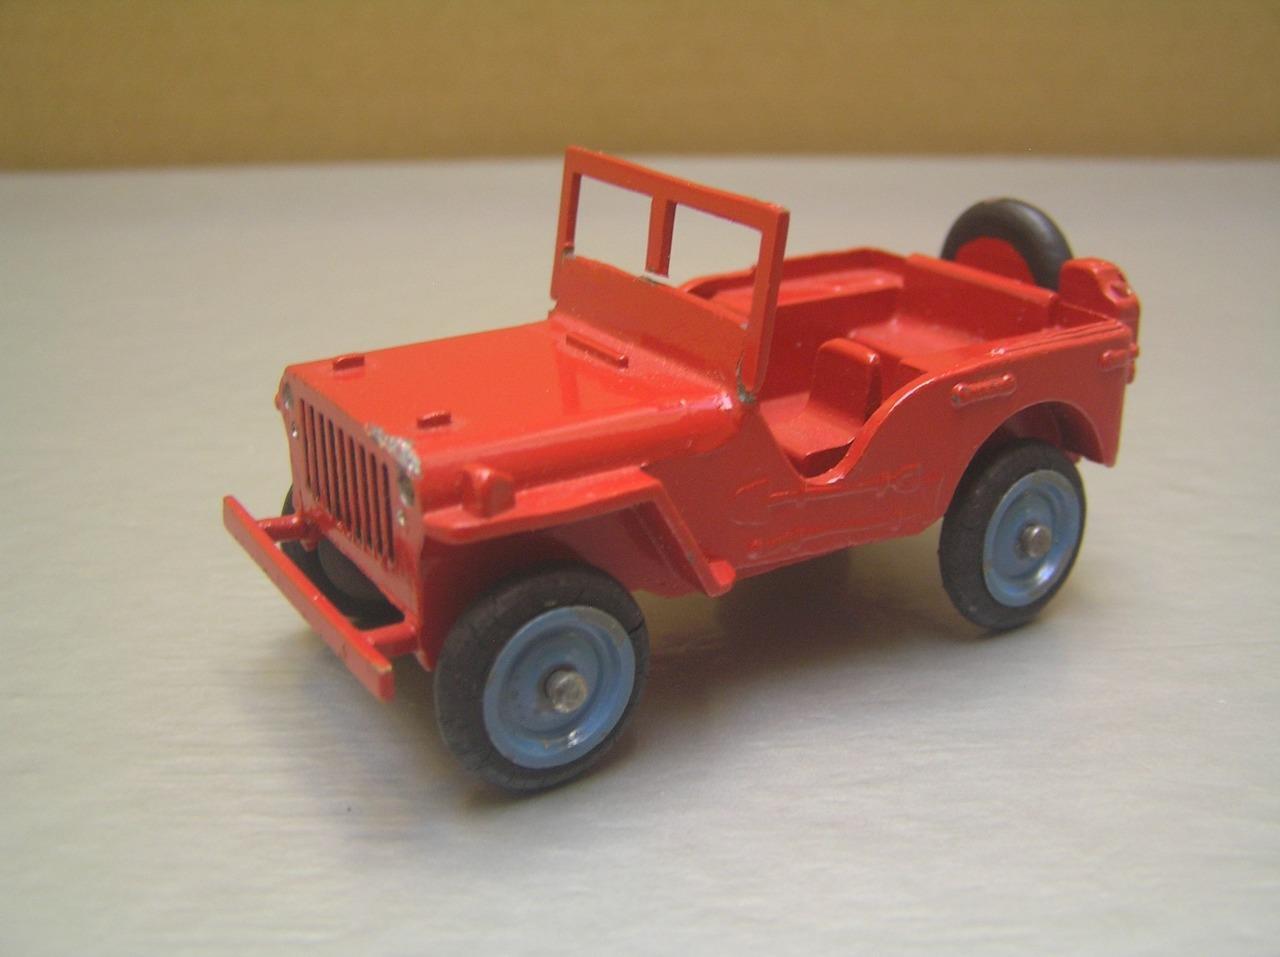 Gasquy Sep-toy Jeep Willys red and blue made in Belgium scarce original toy